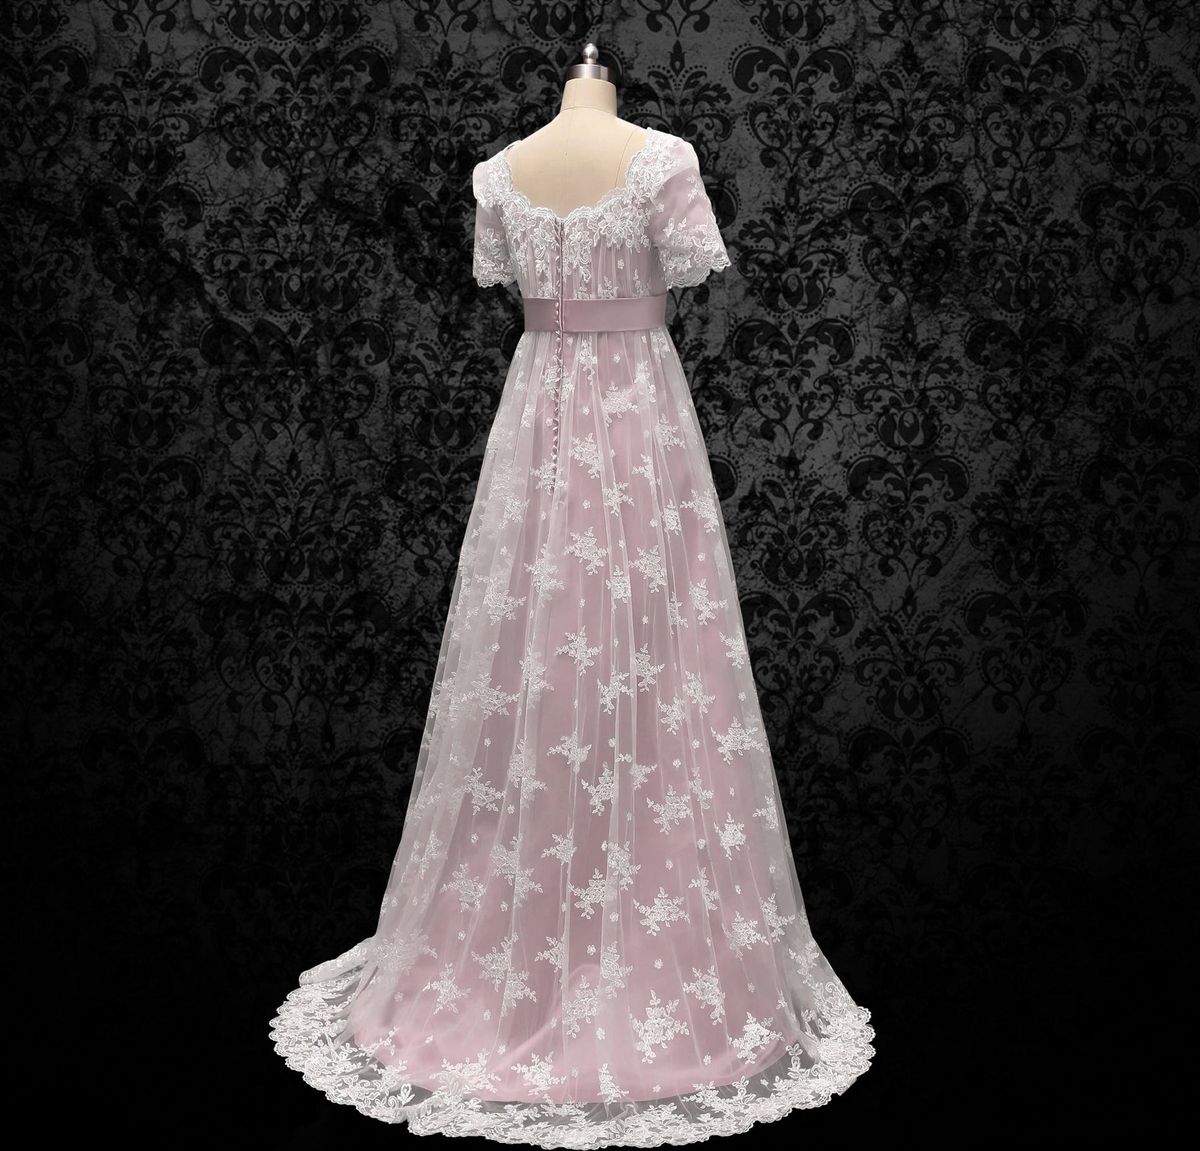 Wonderland By Lilian Plus Size 24 Prom Lace Pink A-line Dress on Queenly